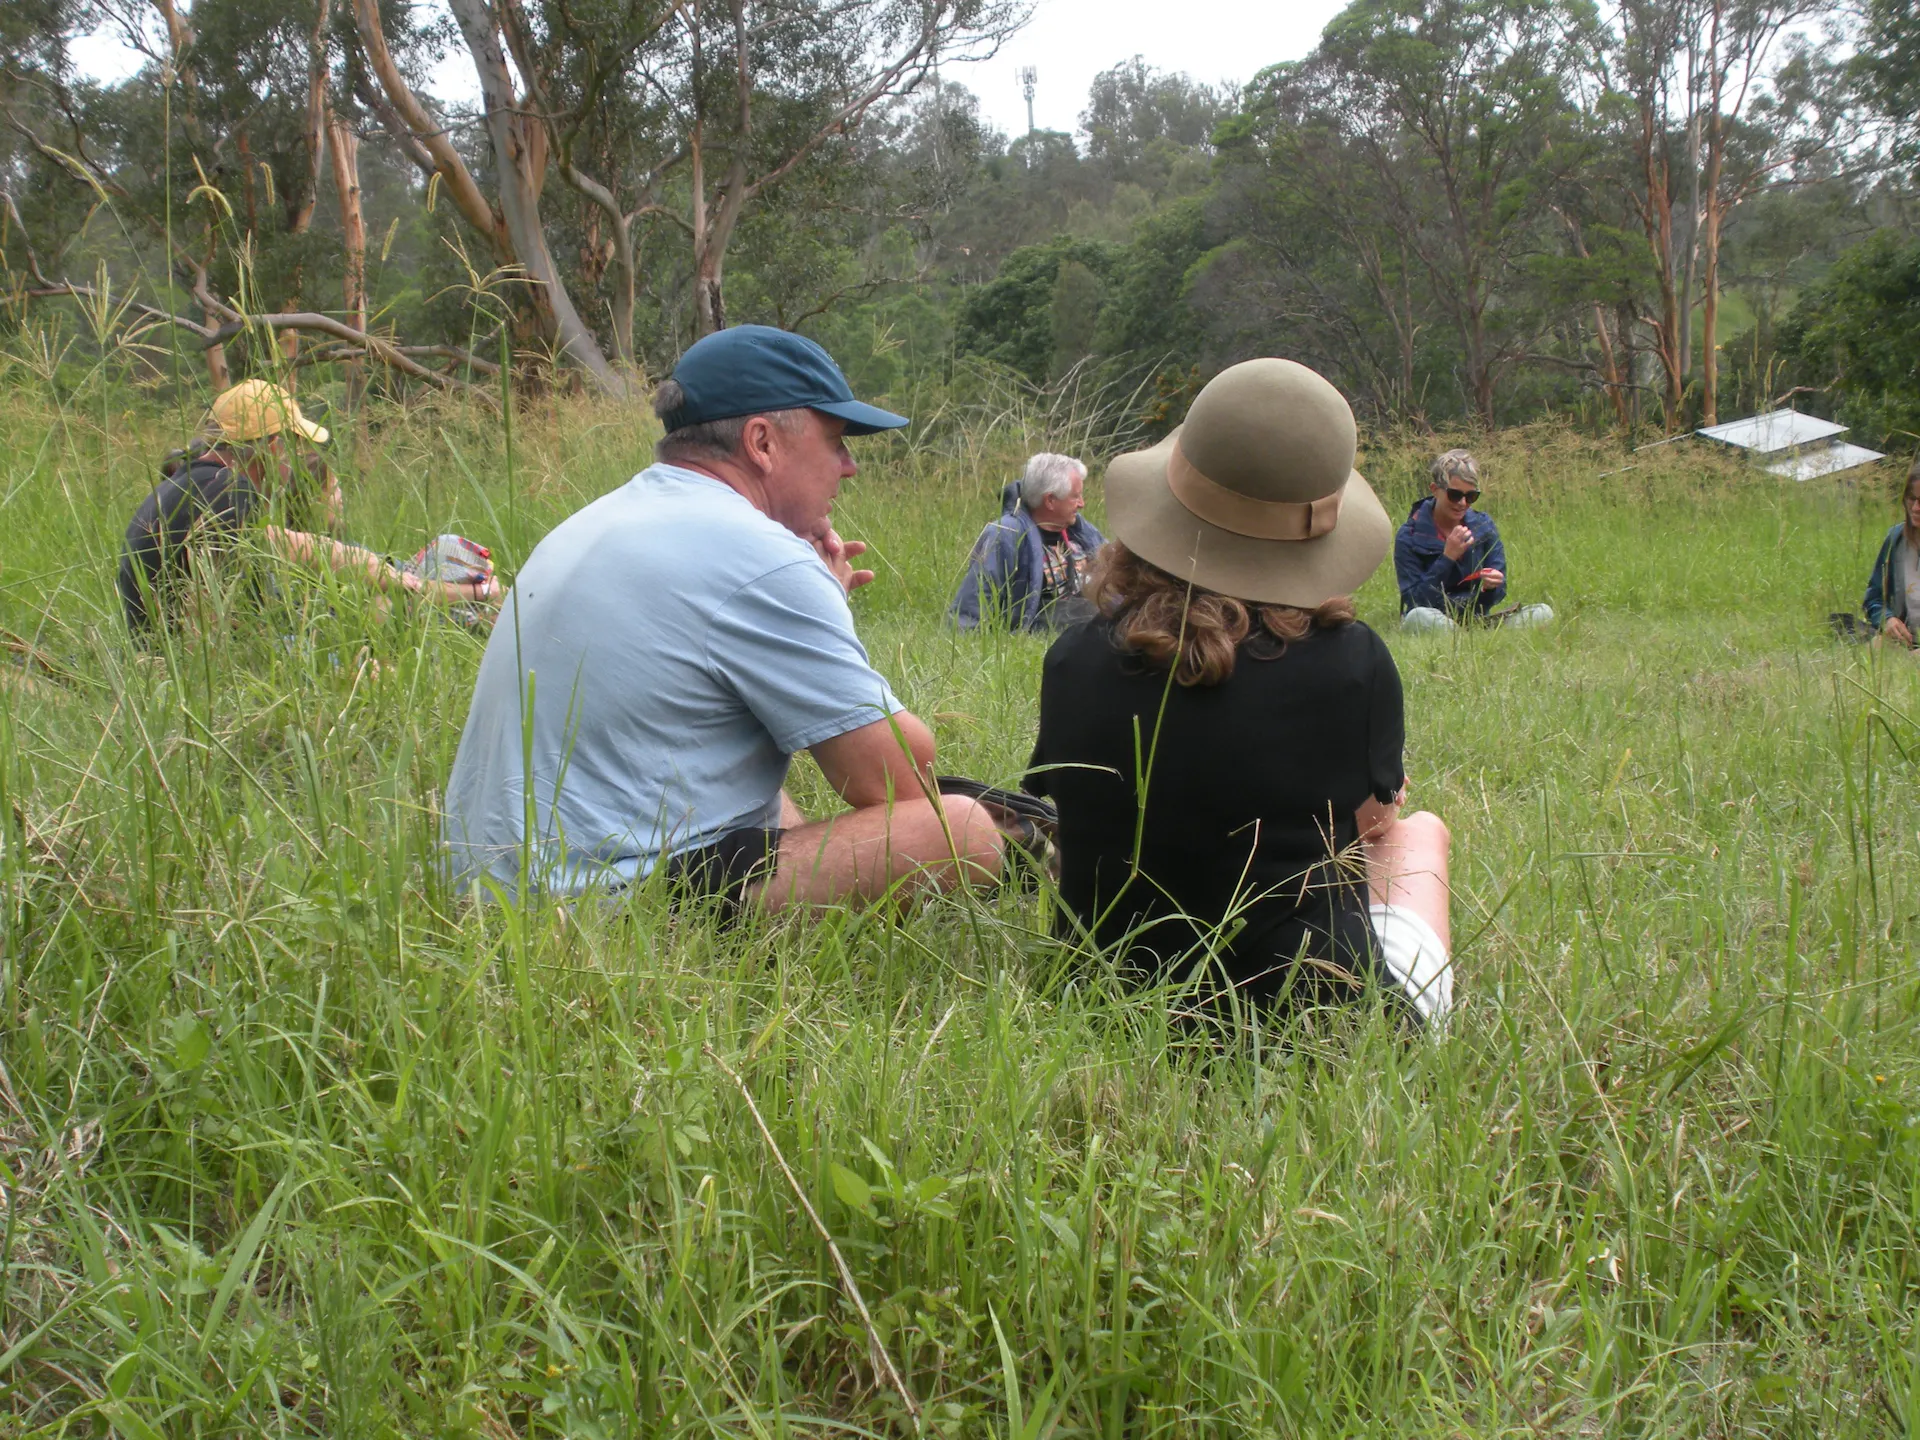 man and woman sitting in long grass with hats, gum trees and other pairs in background